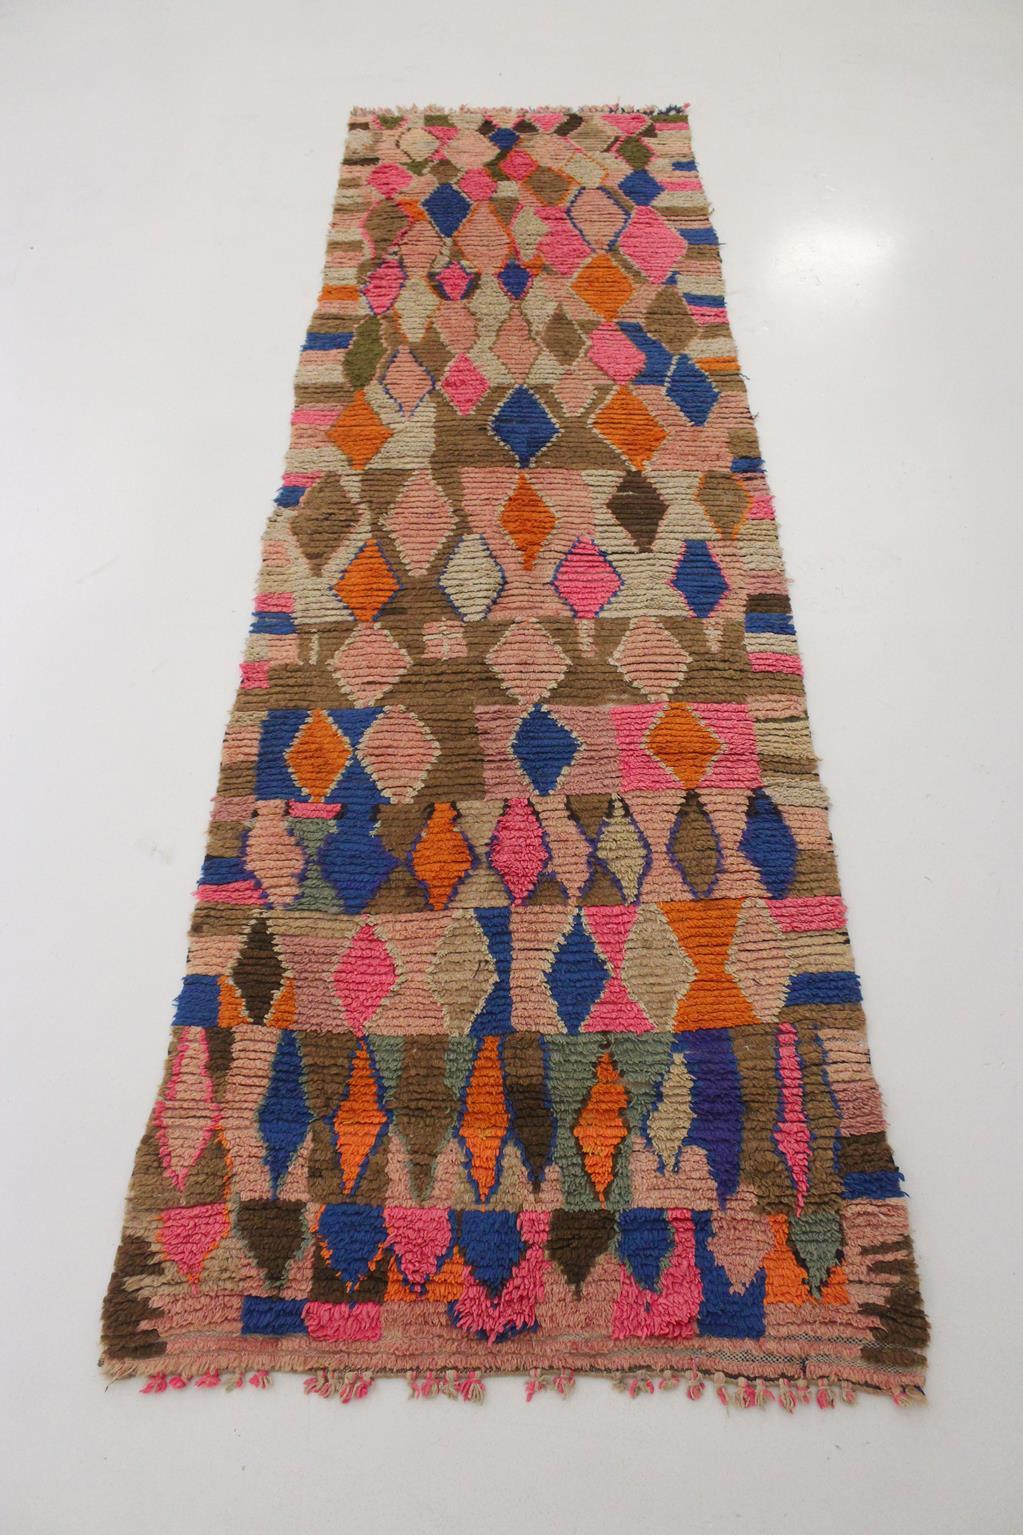 Vintage Moroccan Boujad runner rug - Pink/brown/blue - 3.2x10feet / 97x307cm In Good Condition For Sale In Marrakech, MA